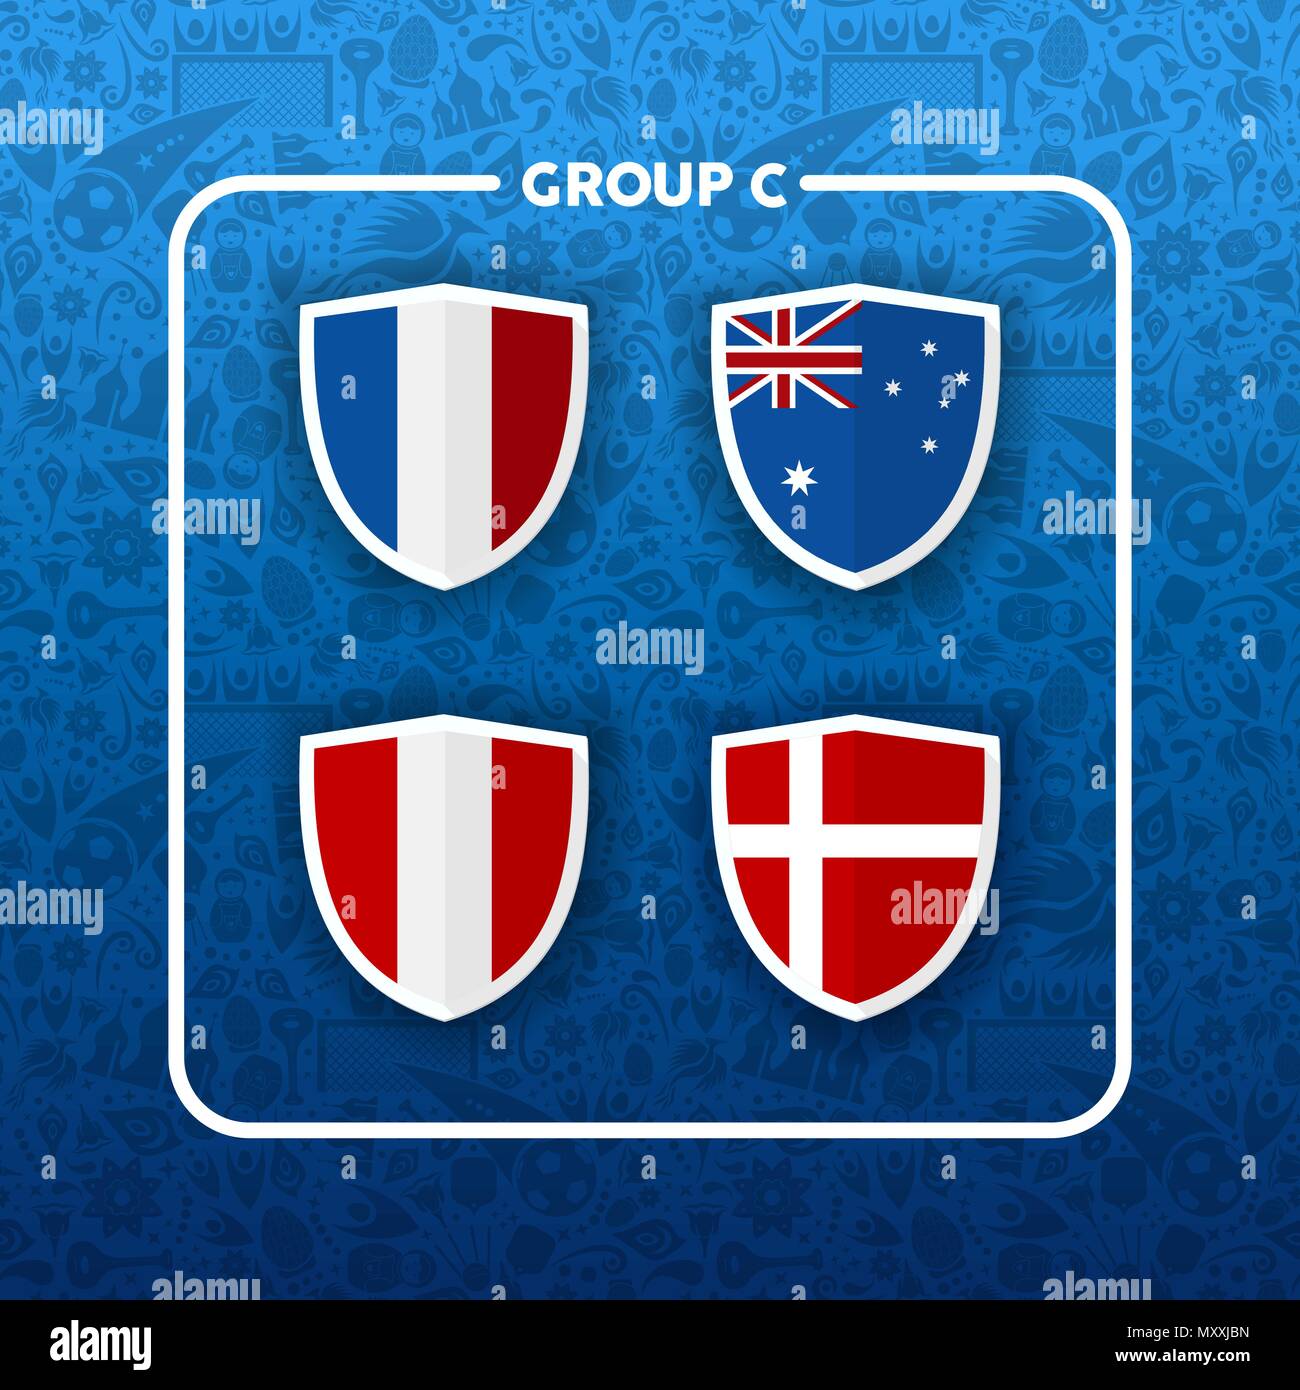 Soccer championship event schedule for 2018. Group C country team list of football match games. Includes France, Australia, Peru and Denmark. EPS10 ve Stock Vector